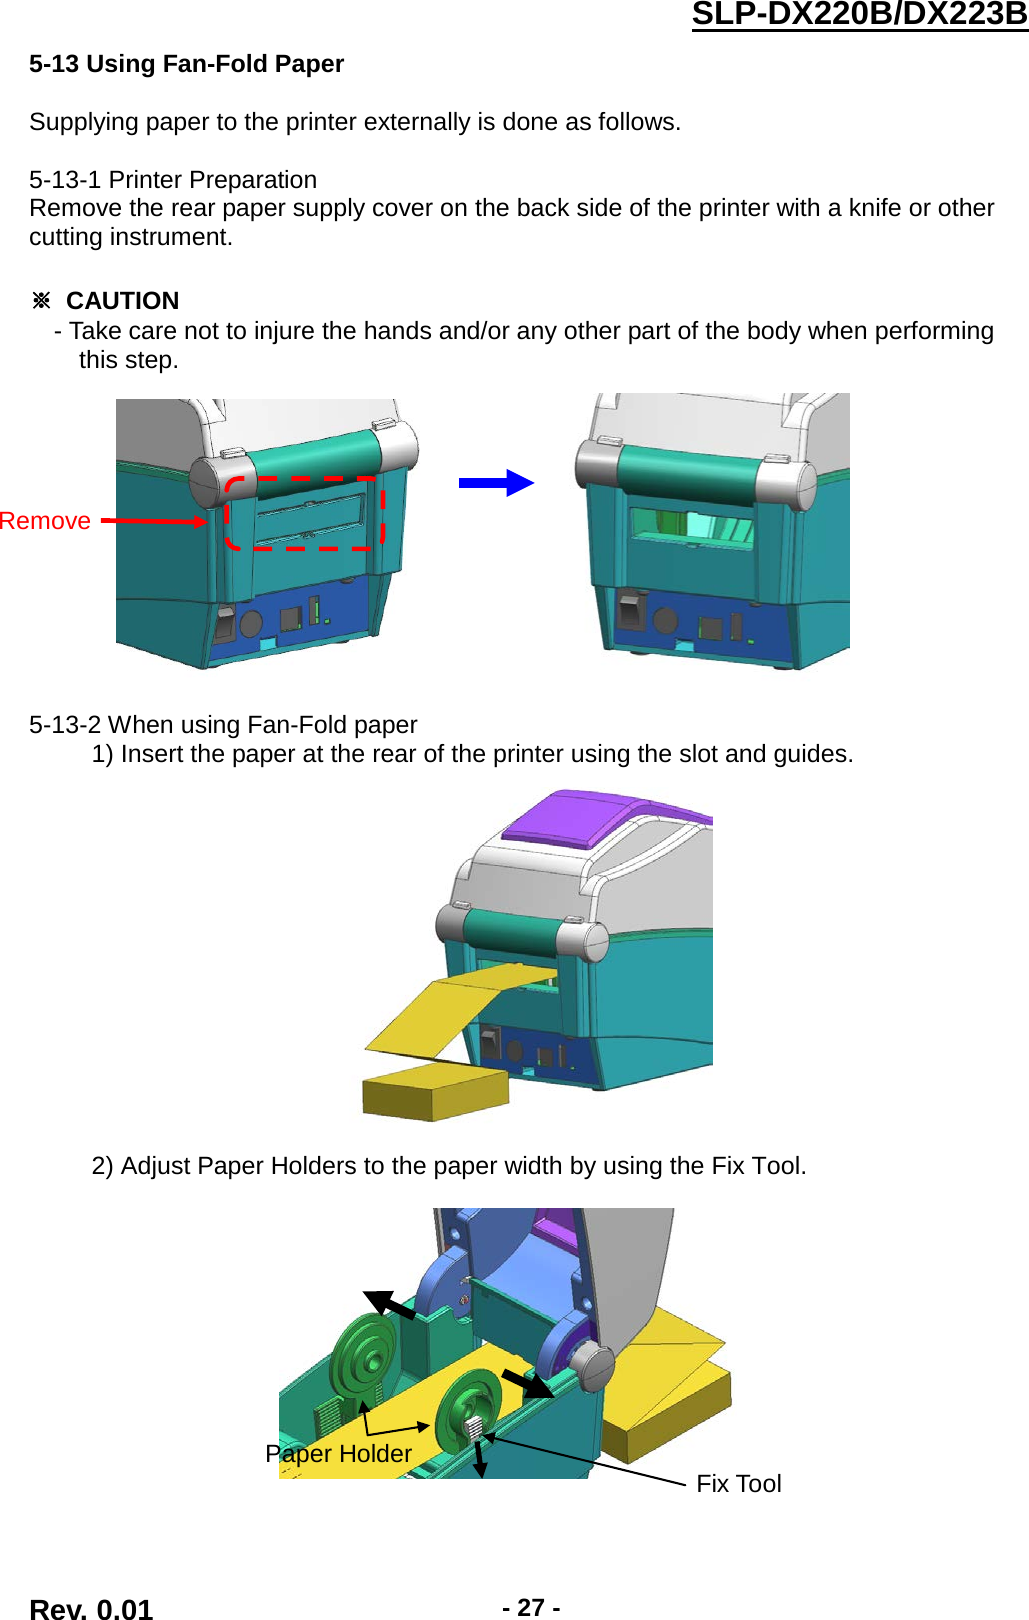  SLP-DX220B/DX223B  5-13 Using Fan-Fold Paper  Supplying paper to the printer externally is done as follows.  5-13-1 Printer Preparation Remove the rear paper supply cover on the back side of the printer with a knife or other cutting instrument.  ※ CAUTION - Take care not to injure the hands and/or any other part of the body when performing   this step.                          5-13-2 When using Fan-Fold paper      1) Insert the paper at the rear of the printer using the slot and guides.         2) Adjust Paper Holders to the paper width by using the Fix Tool.     Remove  Fix Tool  Paper Holder  Rev. 0.01  - 27 - 